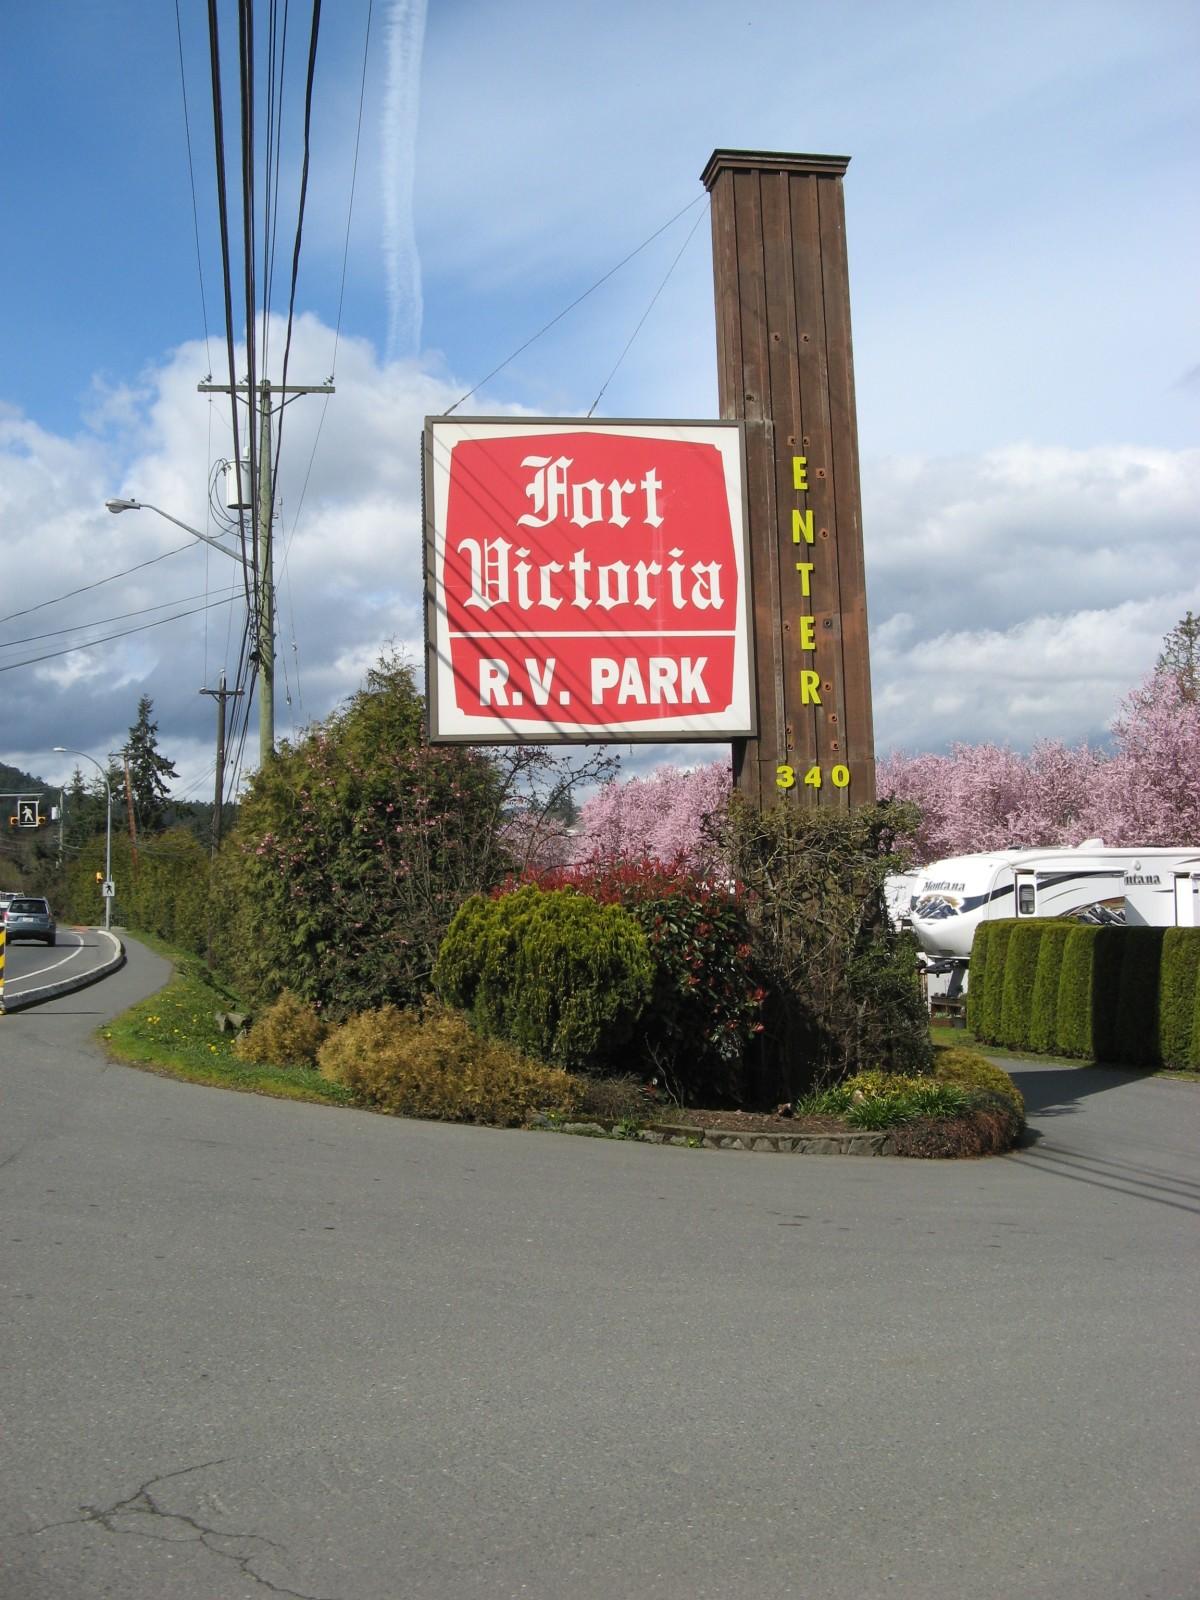 Entrance to Fort Victoria RV Park from Old Island Highway